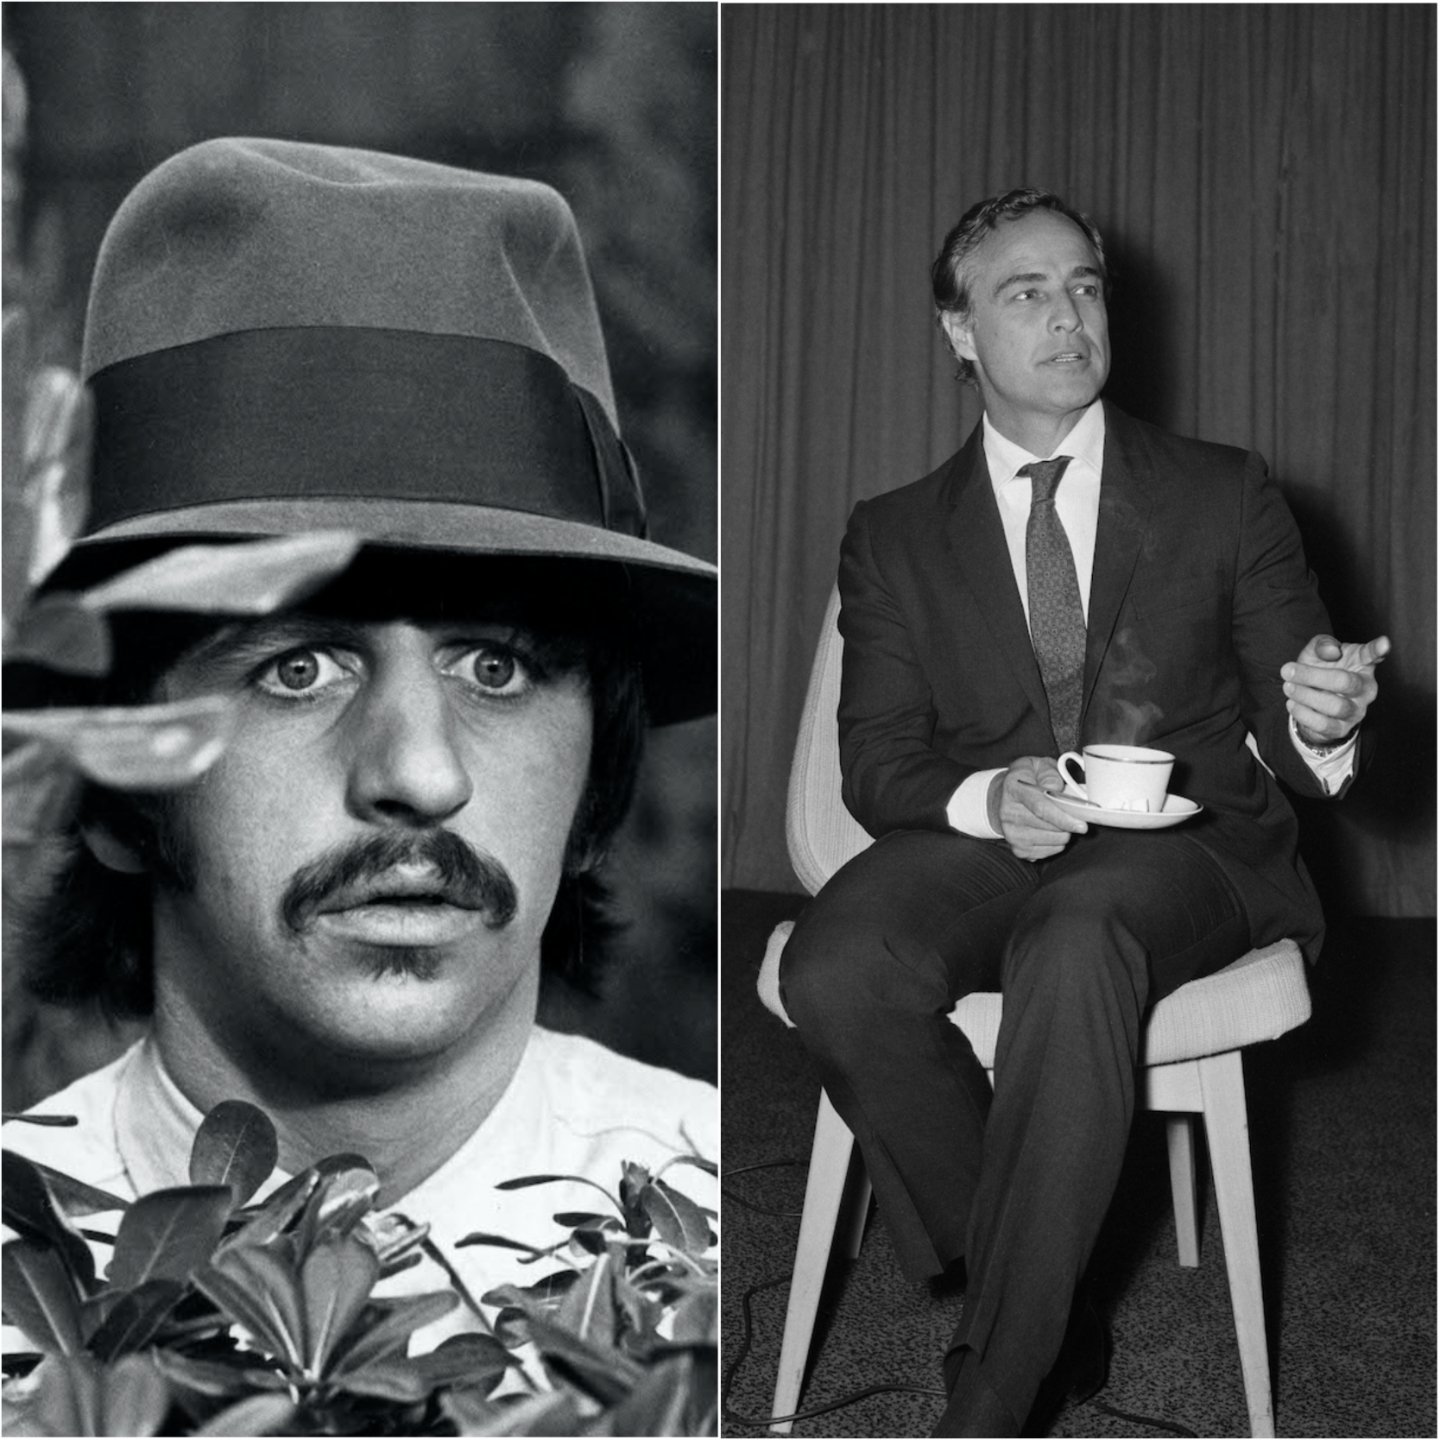 Ringo Starr (left, in the movie 'Candy') had an incredible experience watching Marlon Brando (right) stare at a spoon during a lunch while shooting the movie.